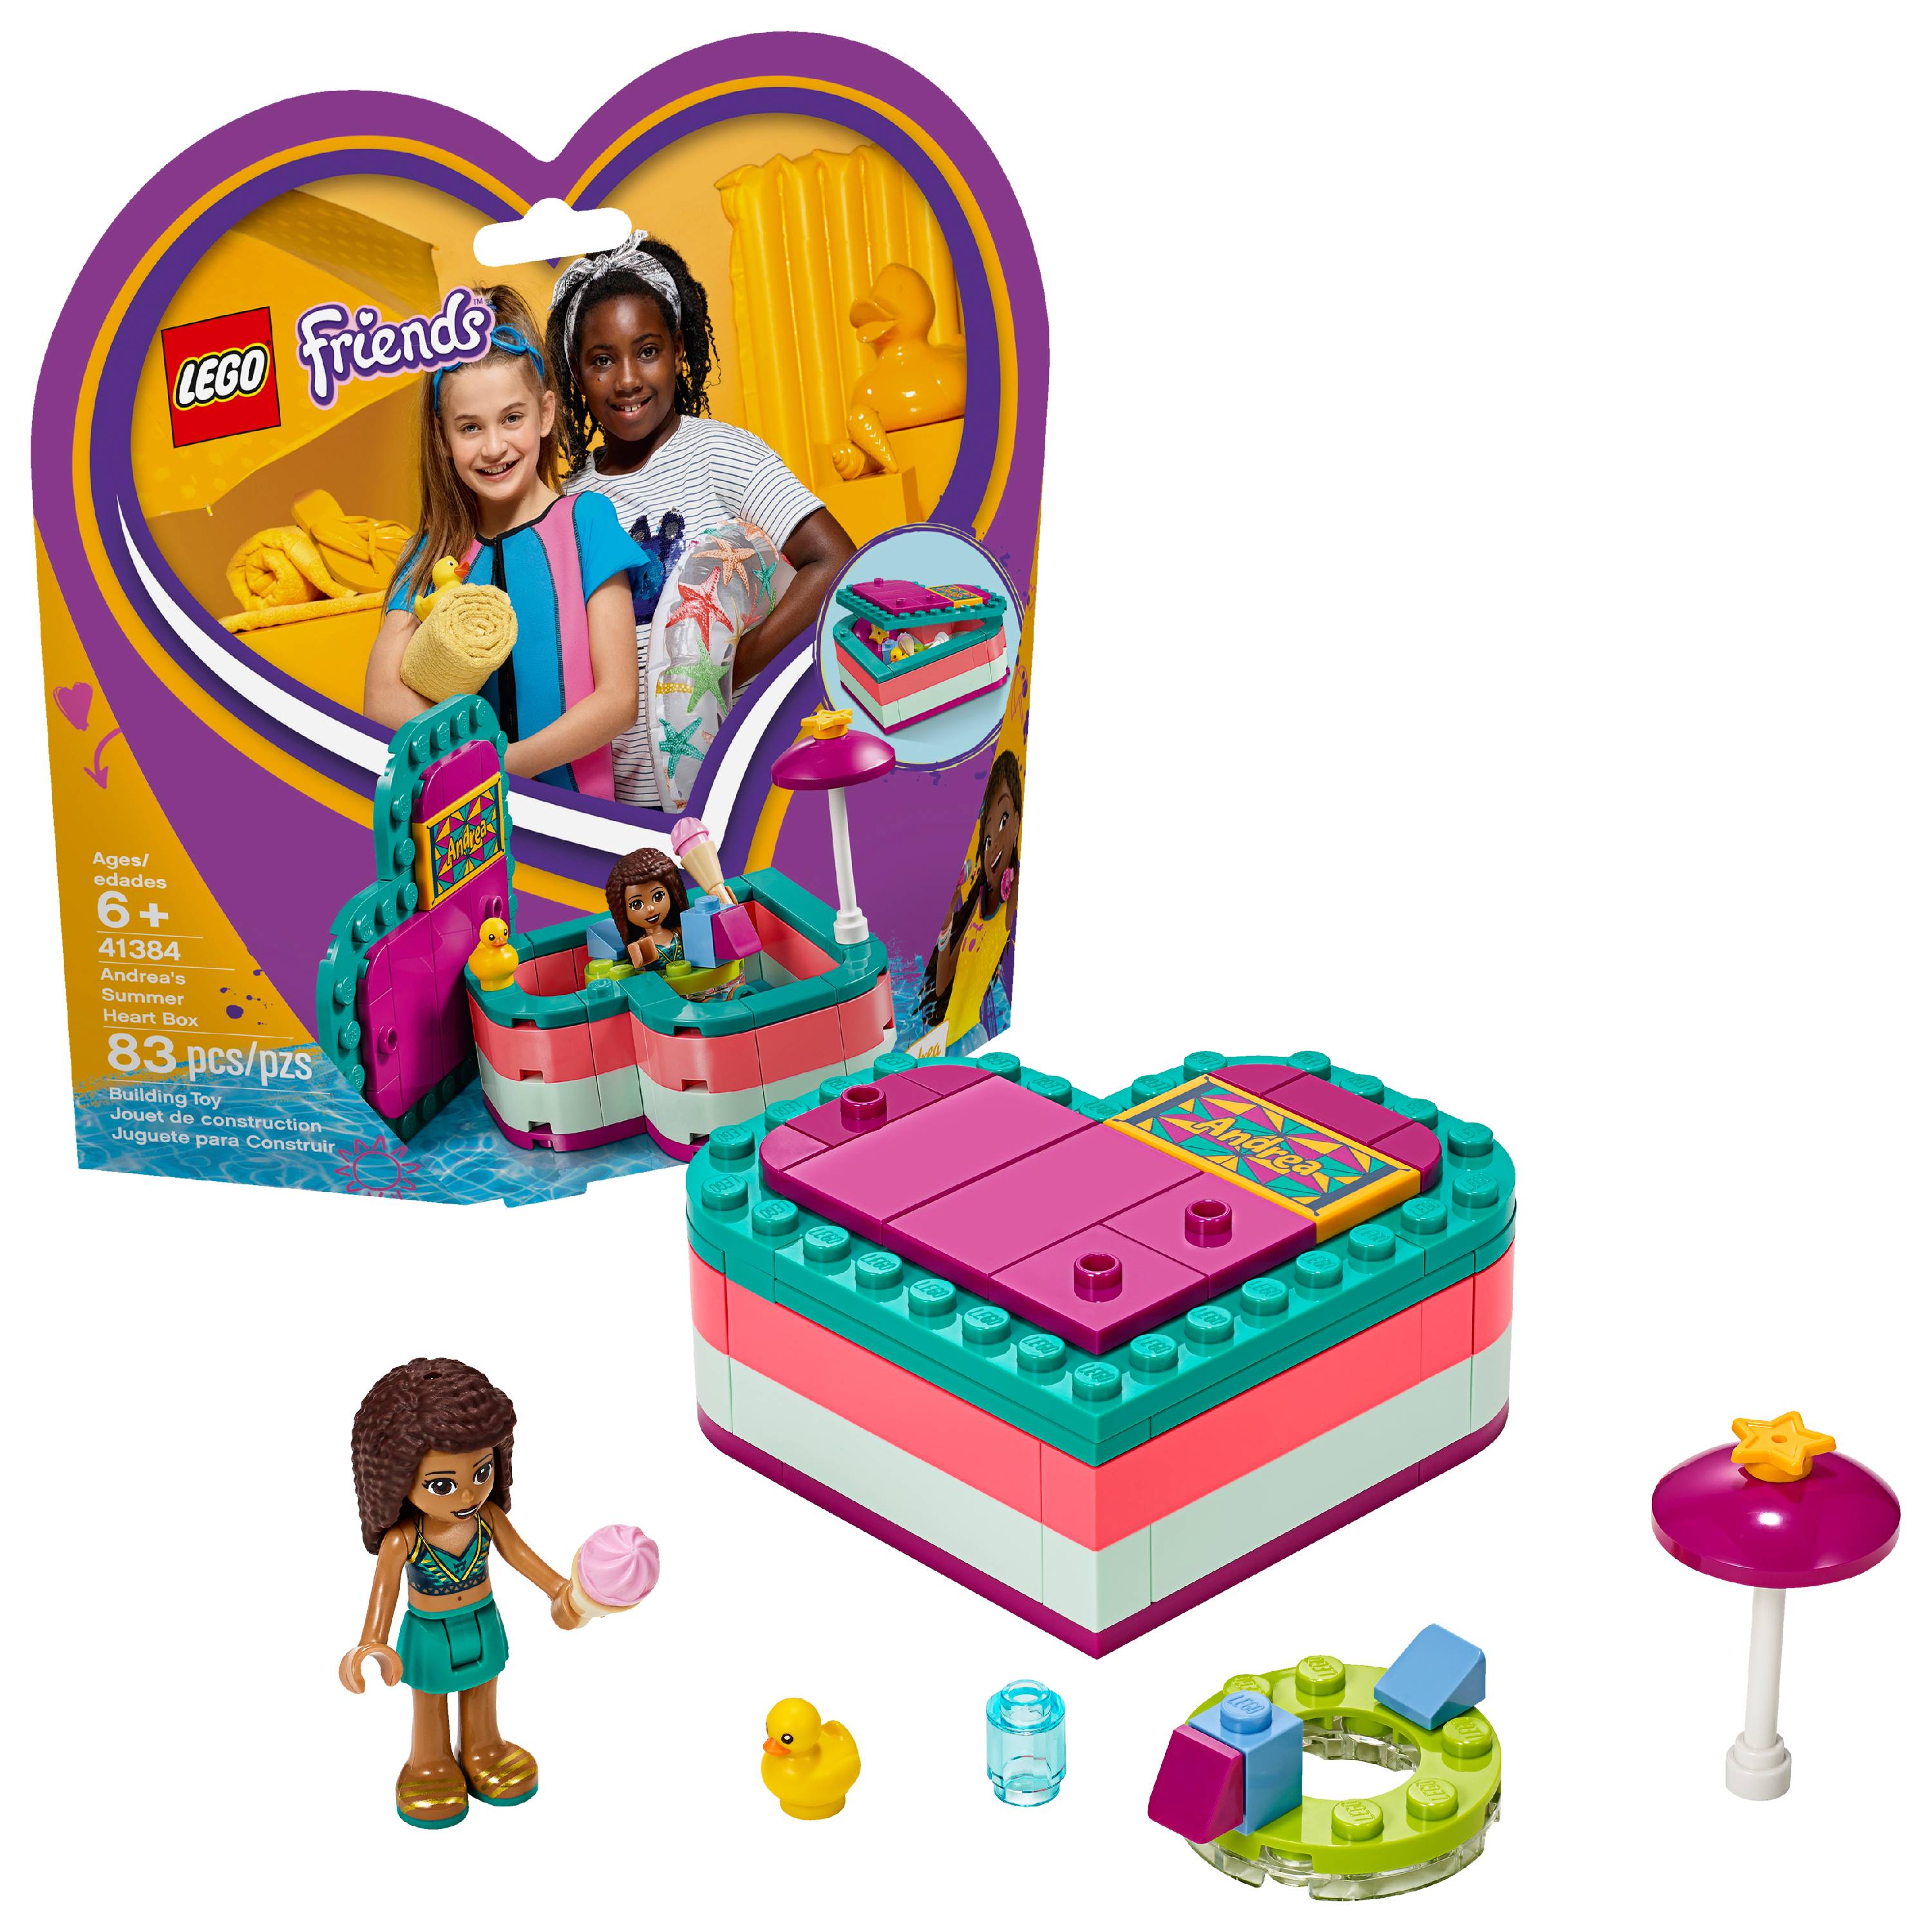 LEGO Friends Andrea's Summer Heart Box 41384 Building Set (83 Pieces) - image 1 of 8